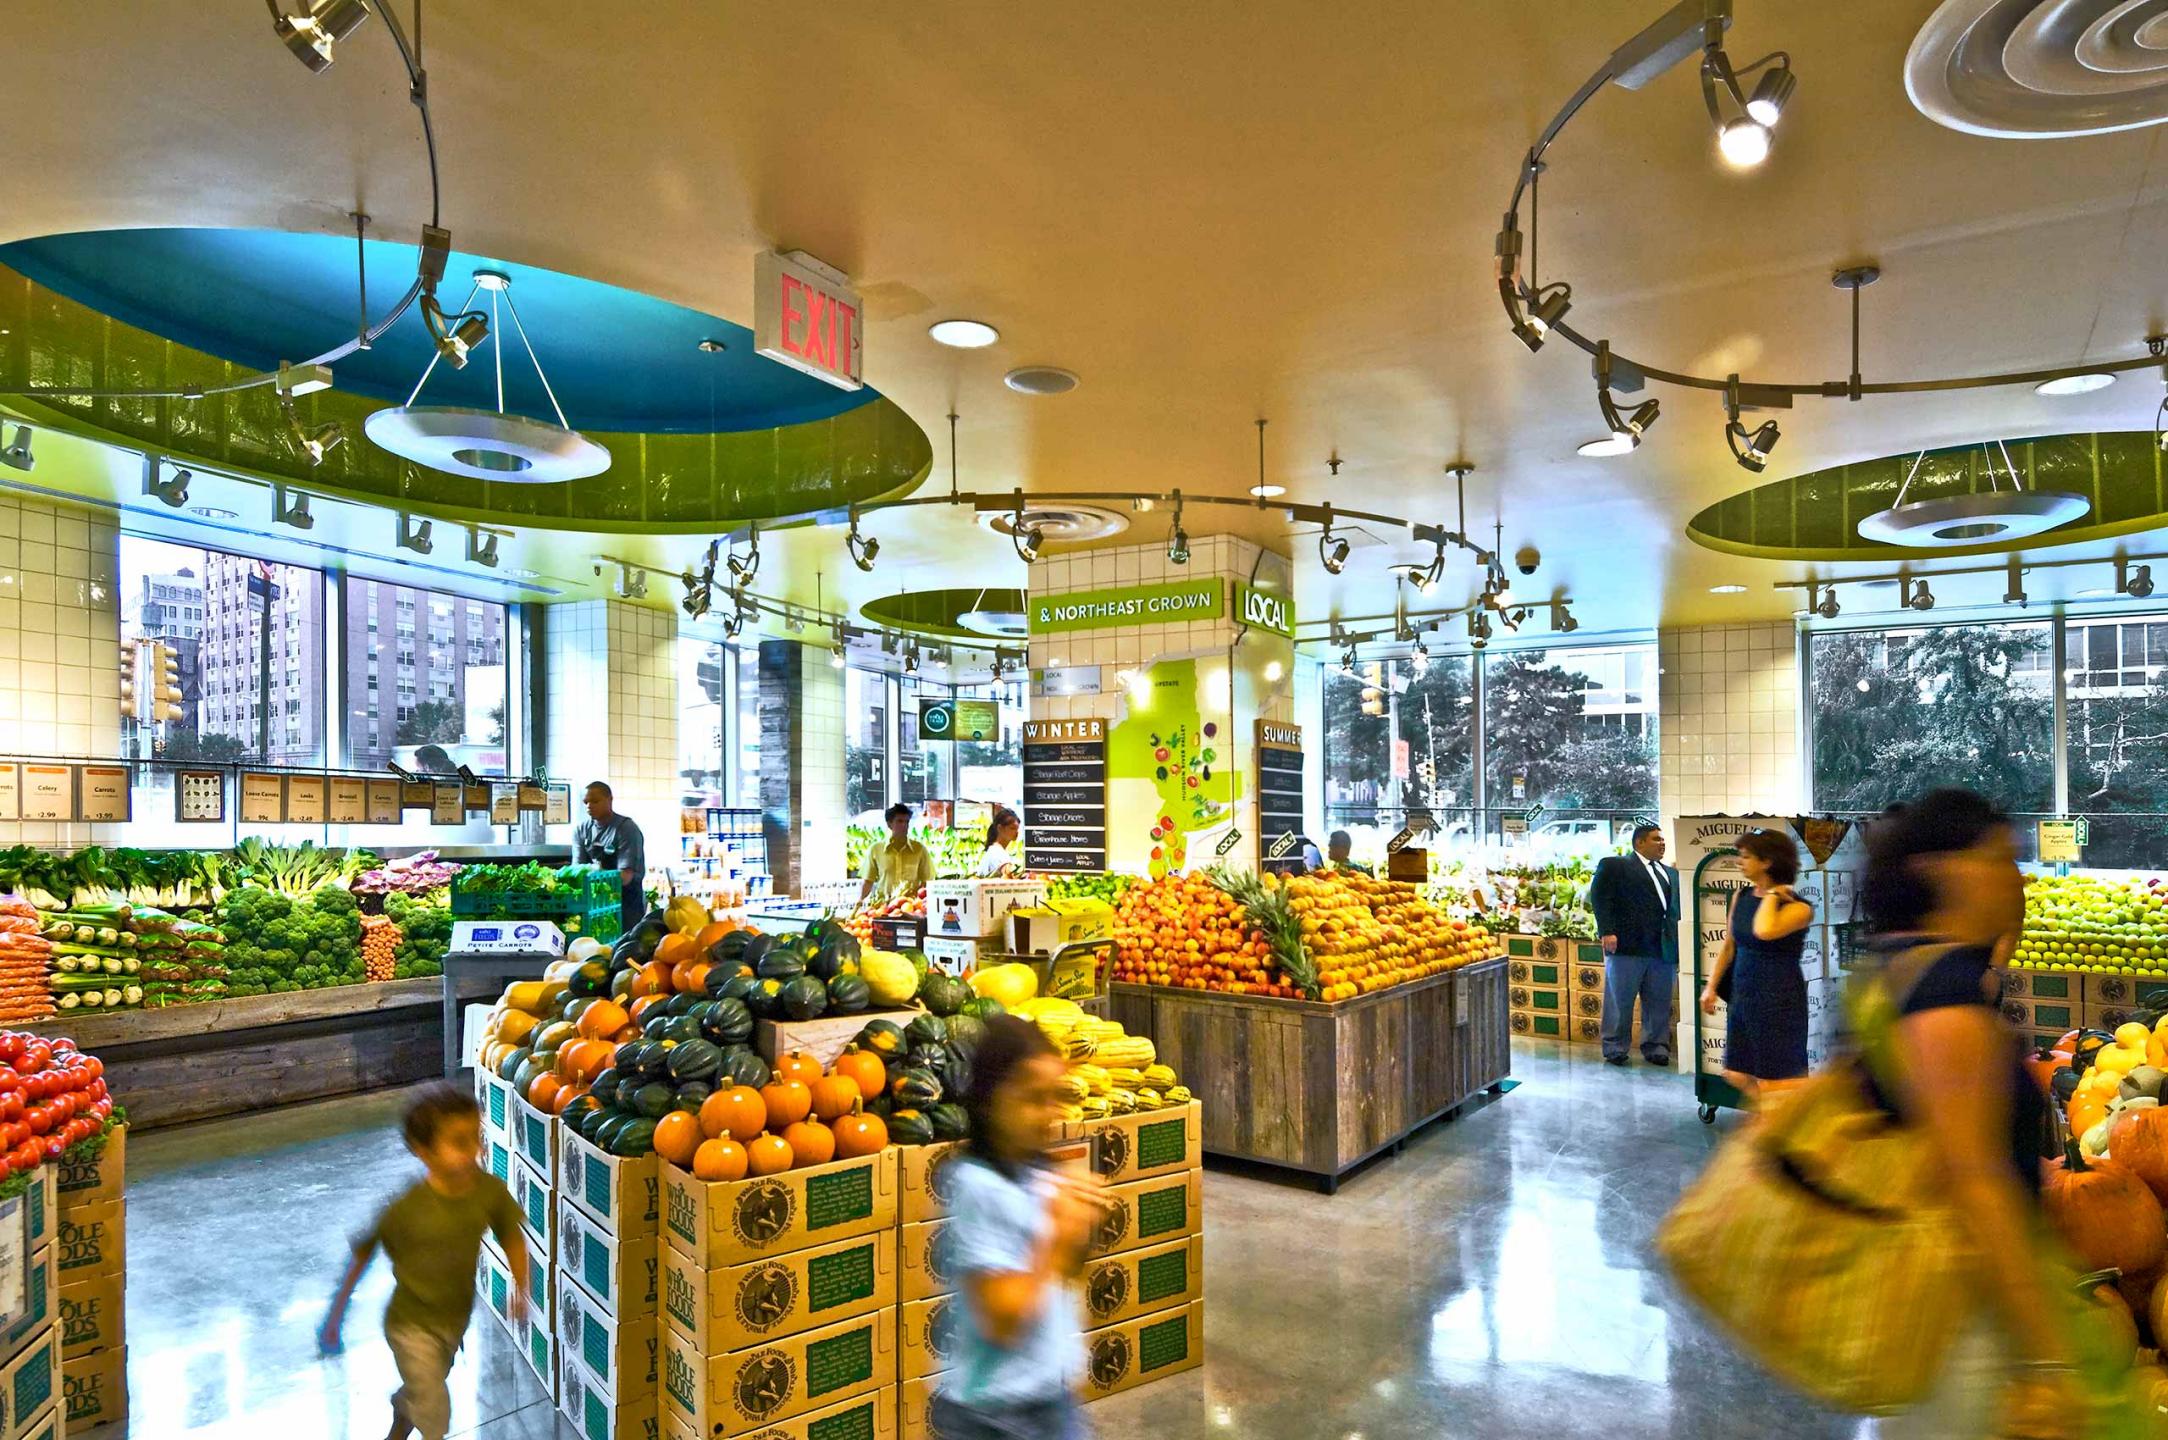 Interior and exterior architectural photography for the retail supermarket Whole Foods Market in New York City and London, England : IMAGES-Keywording : New York NY Architectural Photographer | Interior and Exterior